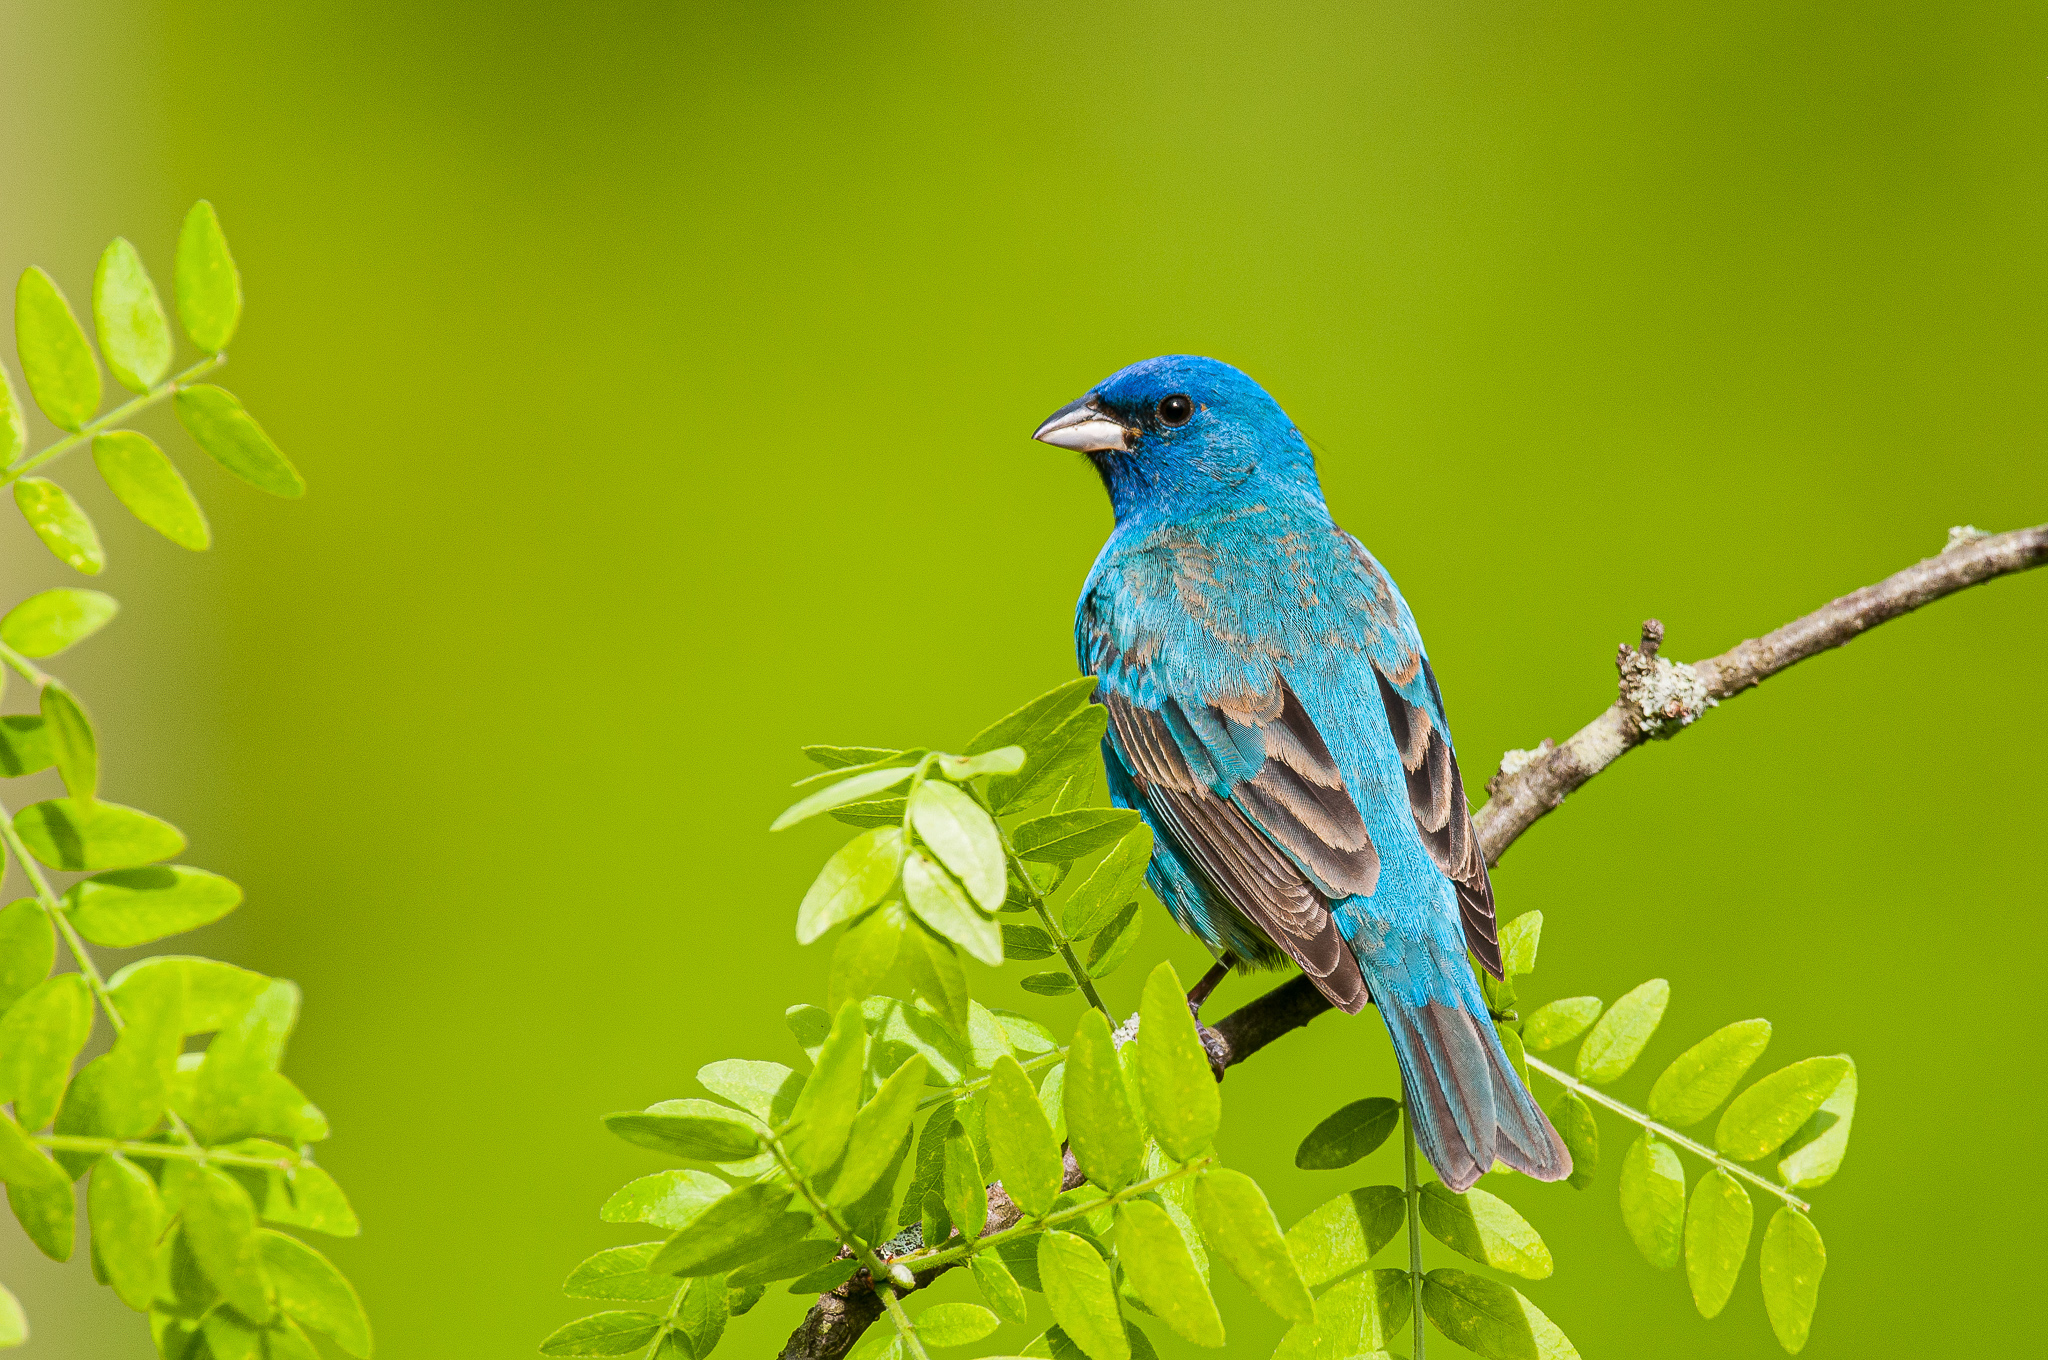 Indigo Buntings have striking blue feathers that blend with the sky ...